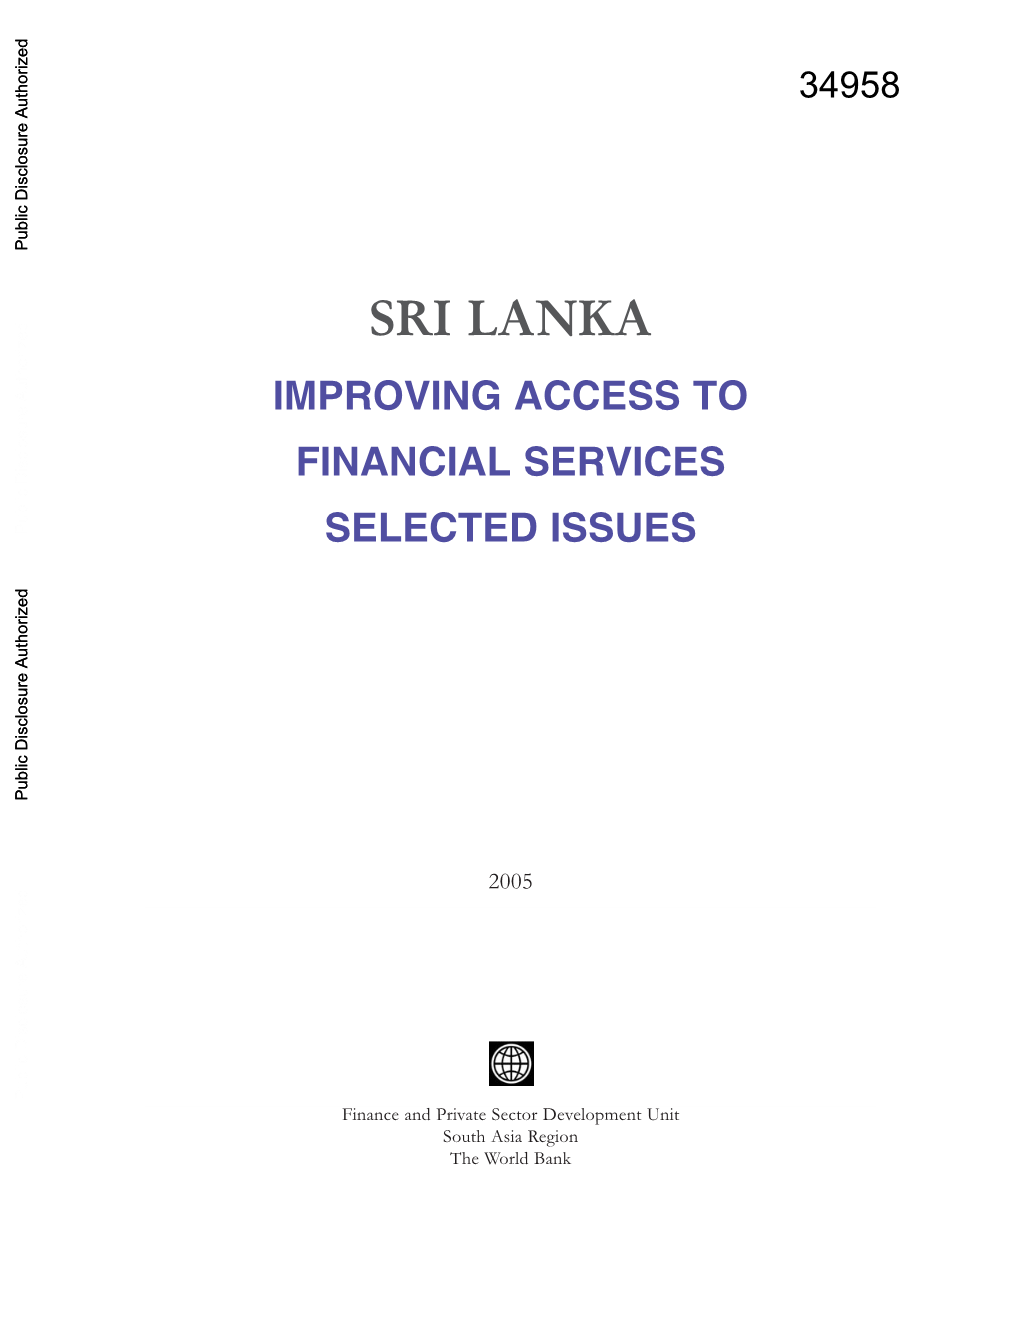 34958 Public Disclosure Authorized SRI LANKA IMPROVING ACCESS to FINANCIAL SERVICES